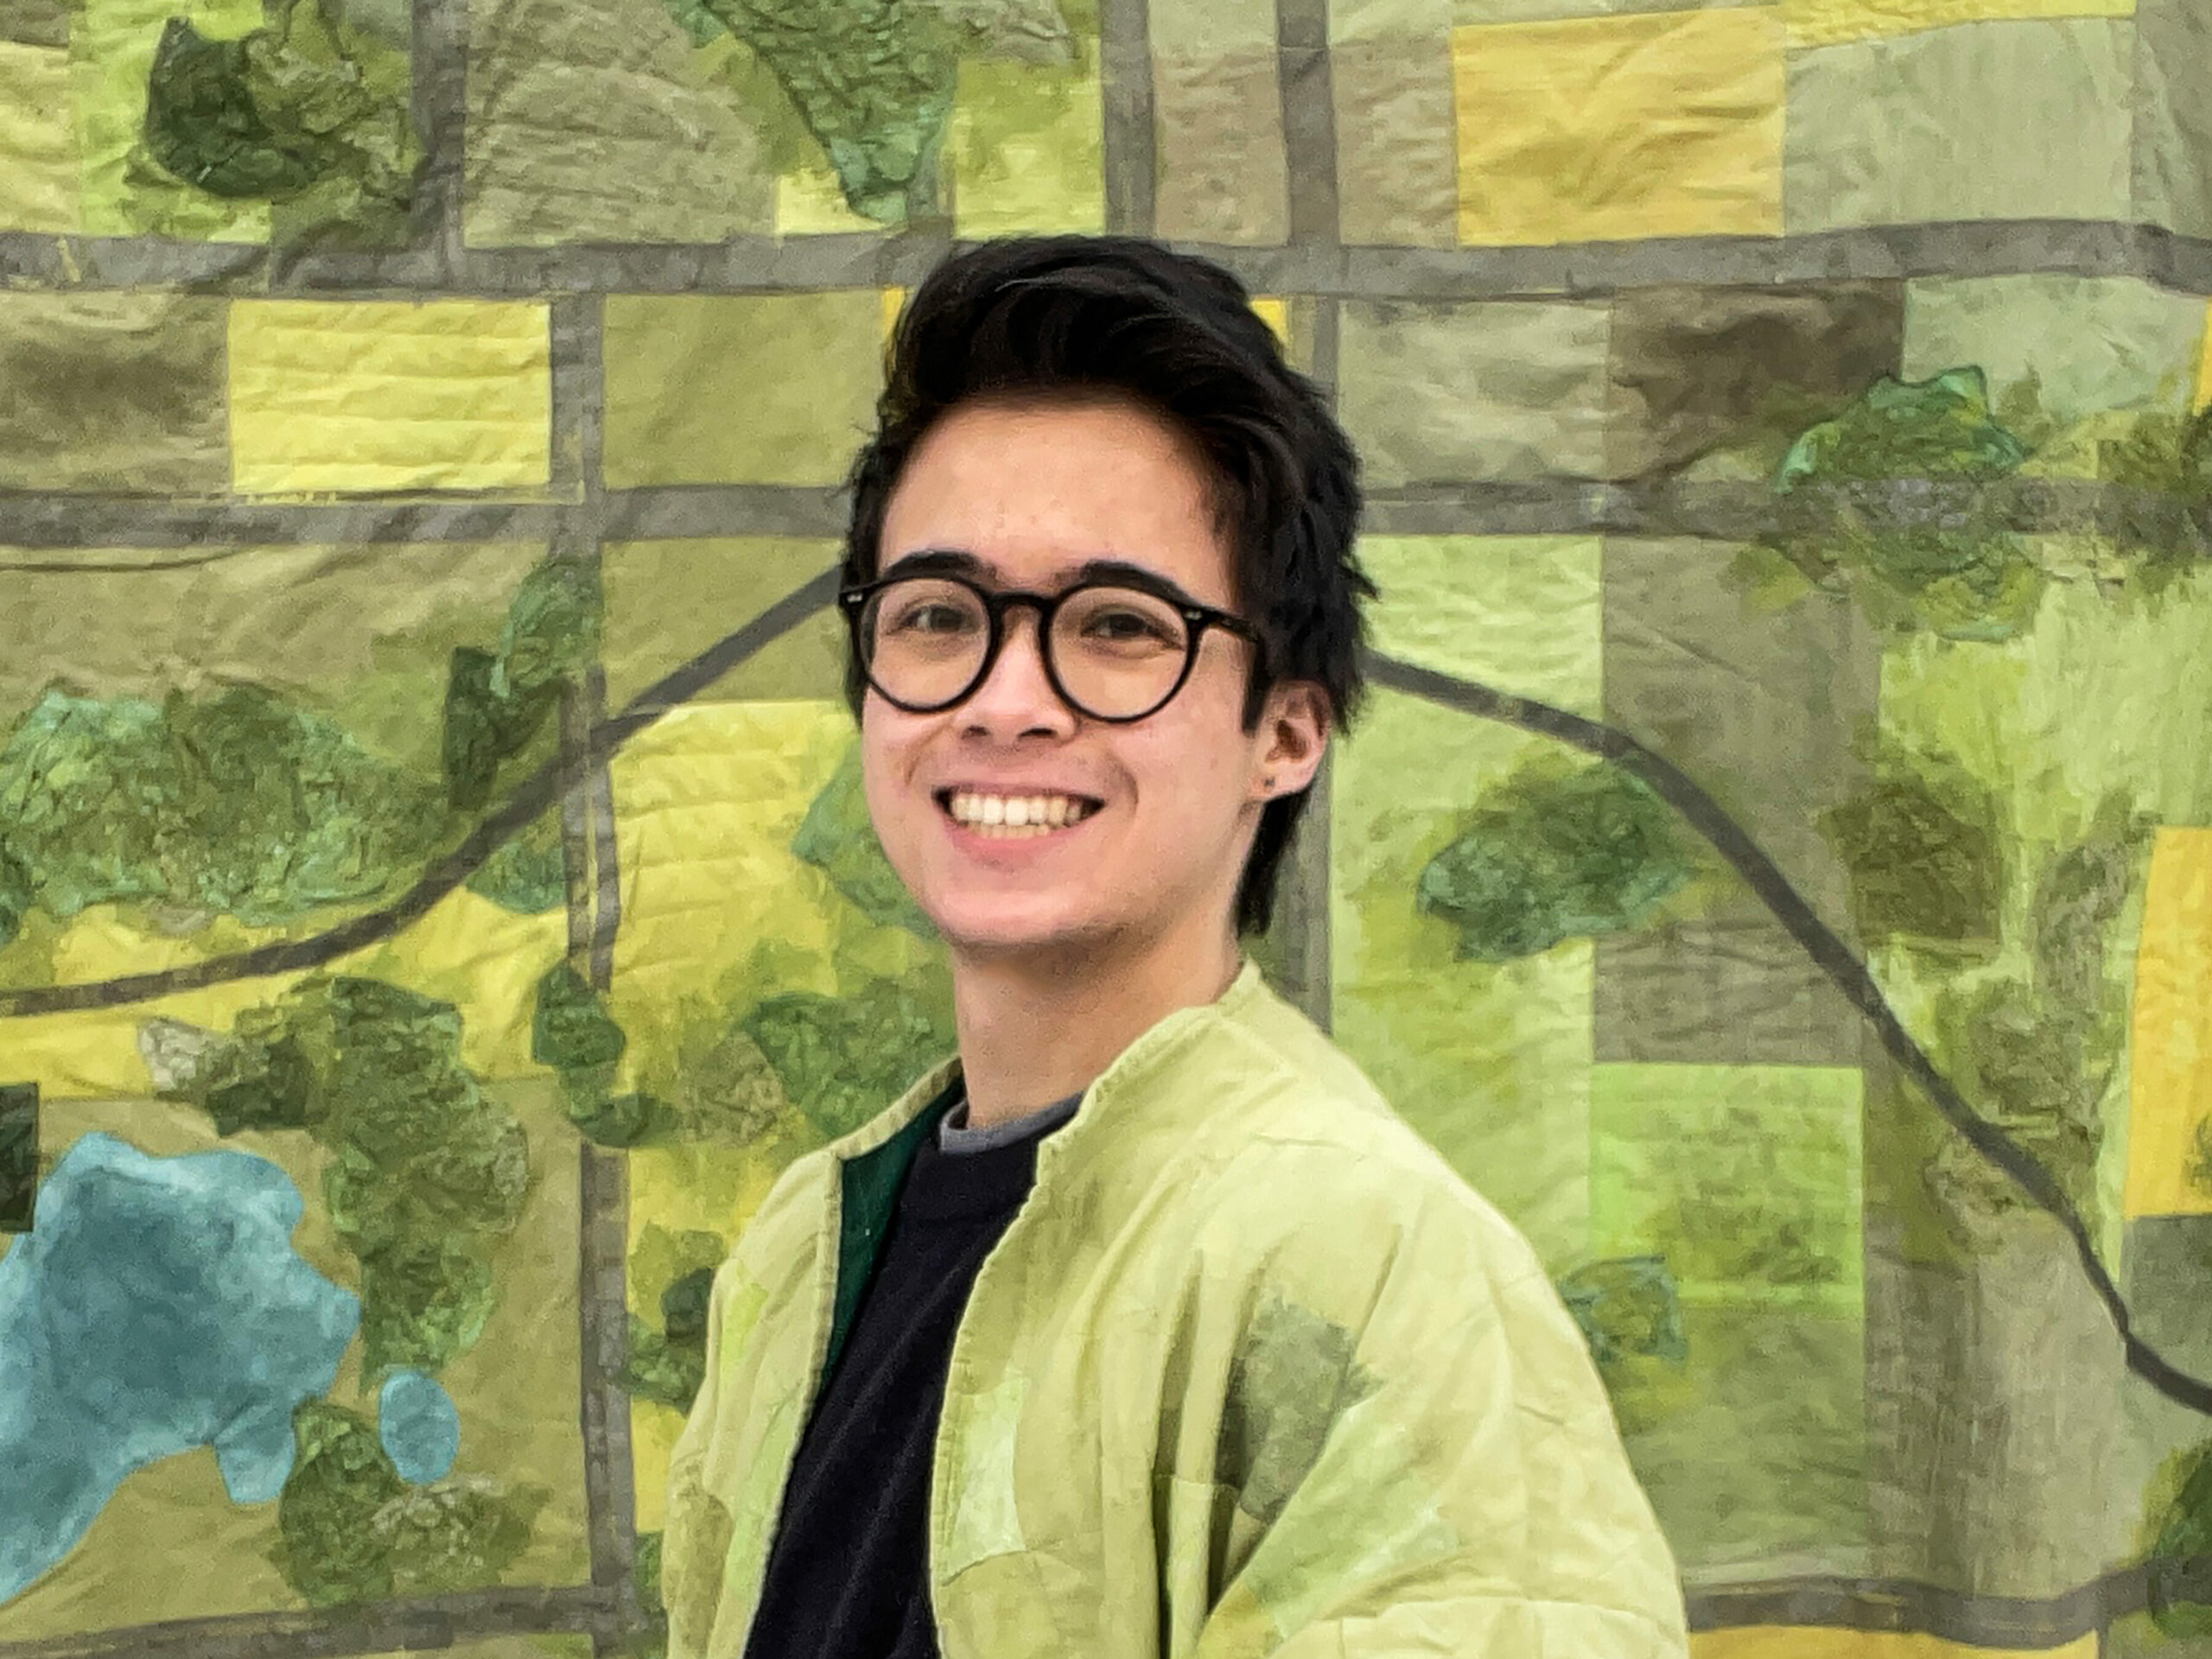 a portrait of Devin smiling at the camera and posing with their hands in their pockets. They are wearing a light green jacket and black shirt and pants, and has round black glasses and short black hair. In the background is a quilted fabric piece with various green and grey textures.